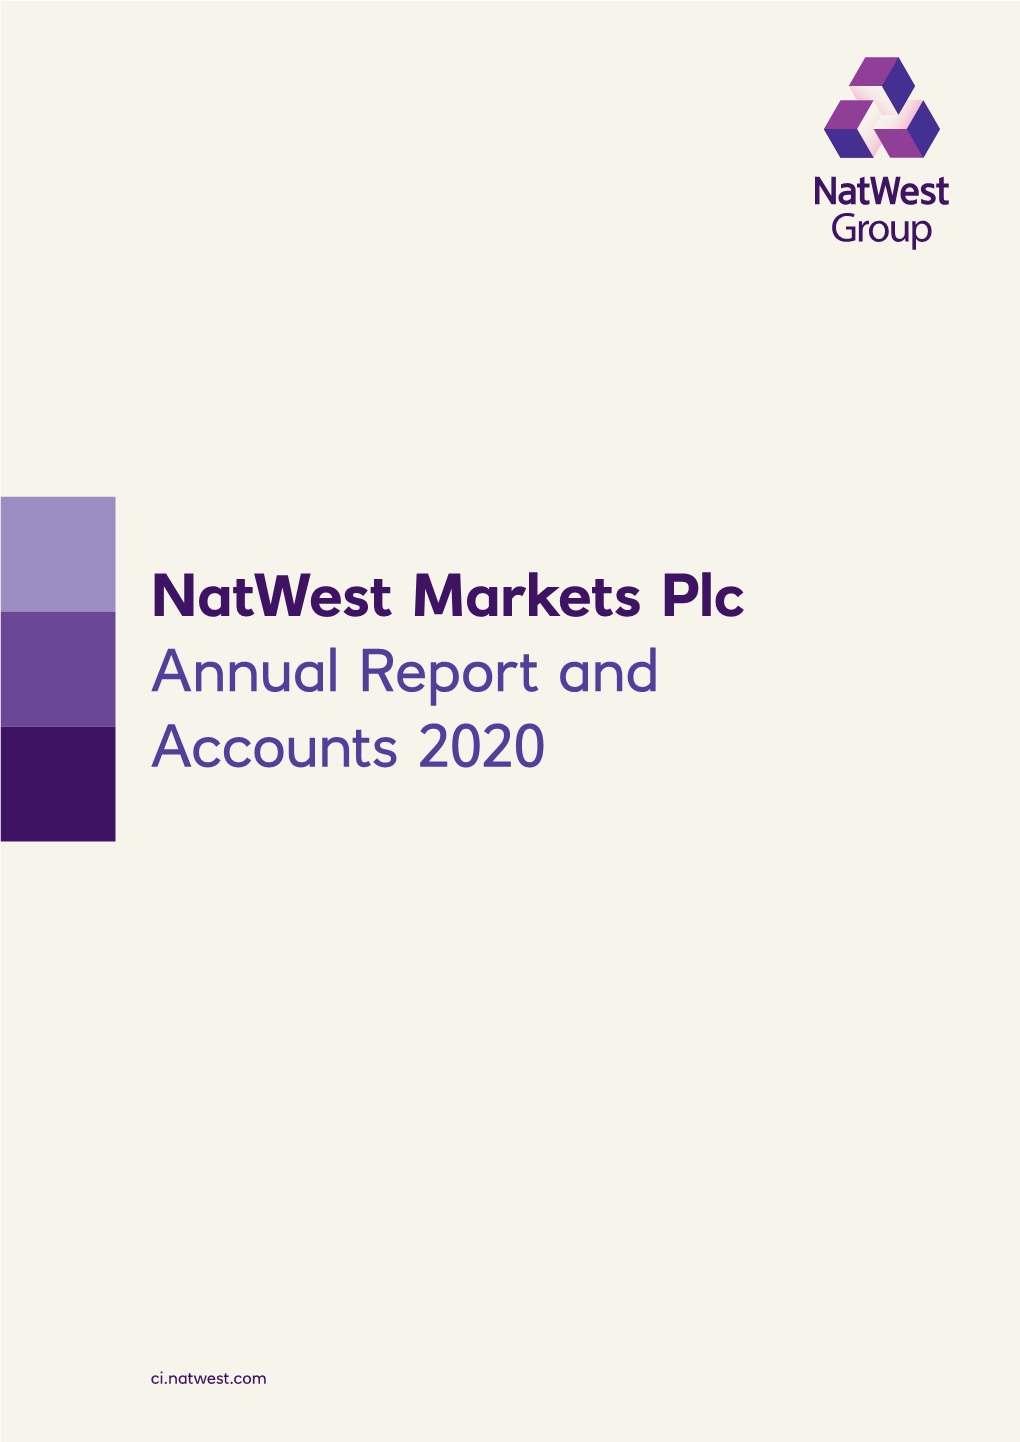 Natwest Markets Plc Annual Report and Accounts 2020